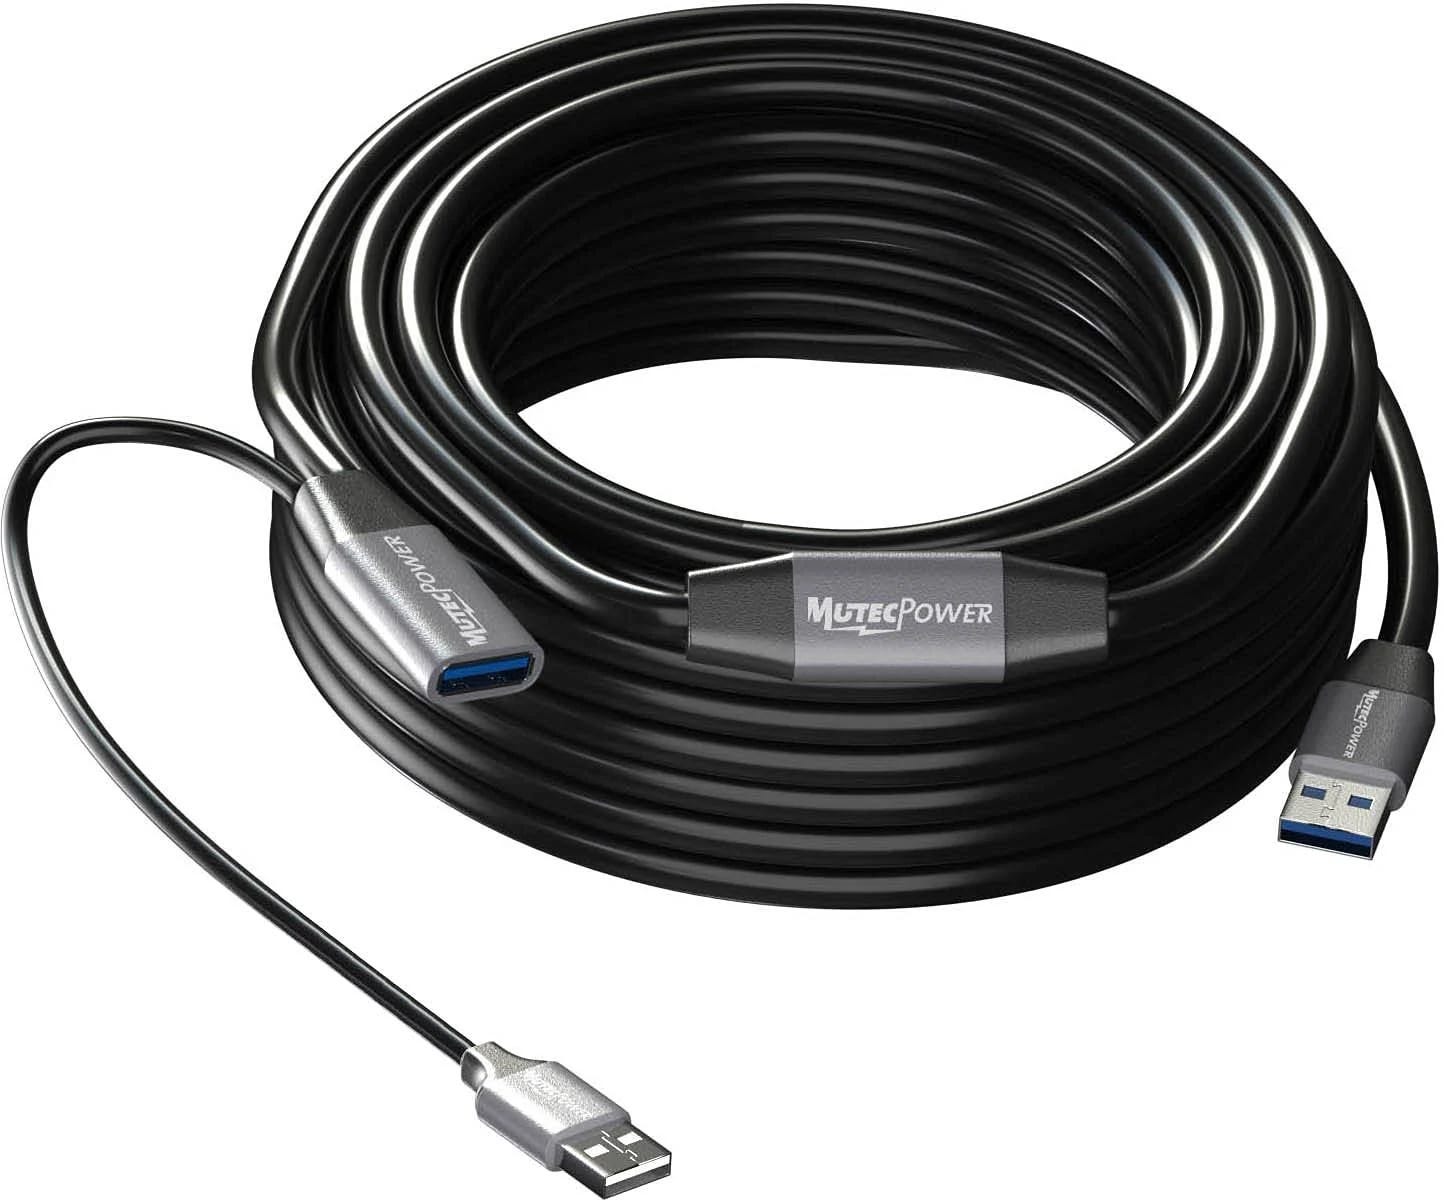 Active USB 3.0 Extension Cable for Super Speed Data Transfer | Image